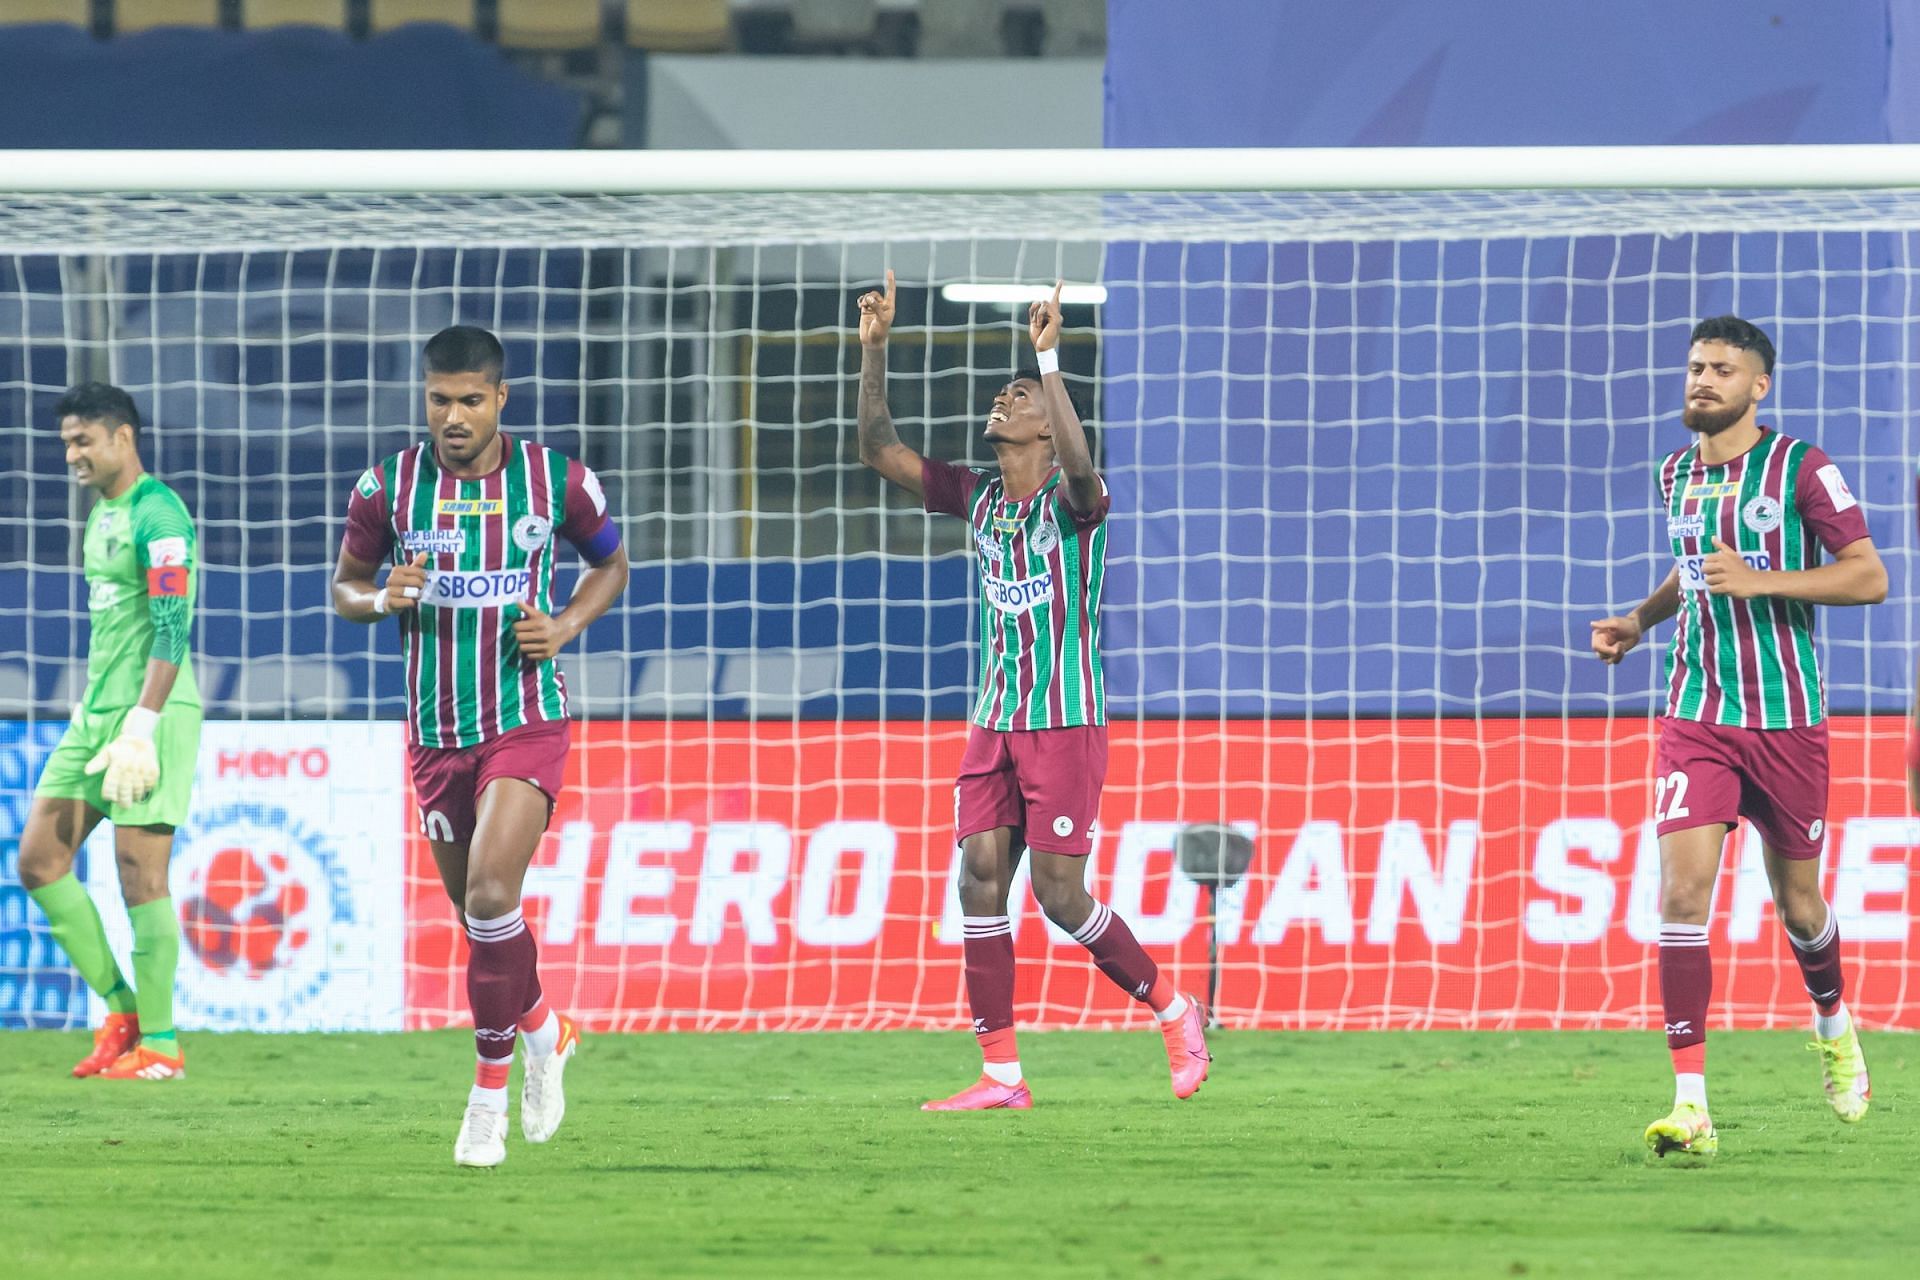 ATK Mohun Bagan&#039;s Liston Colaco celebrates along with team mates after scoring a goal against NorthEast United FC..(Image Courtesy: ISL Media)